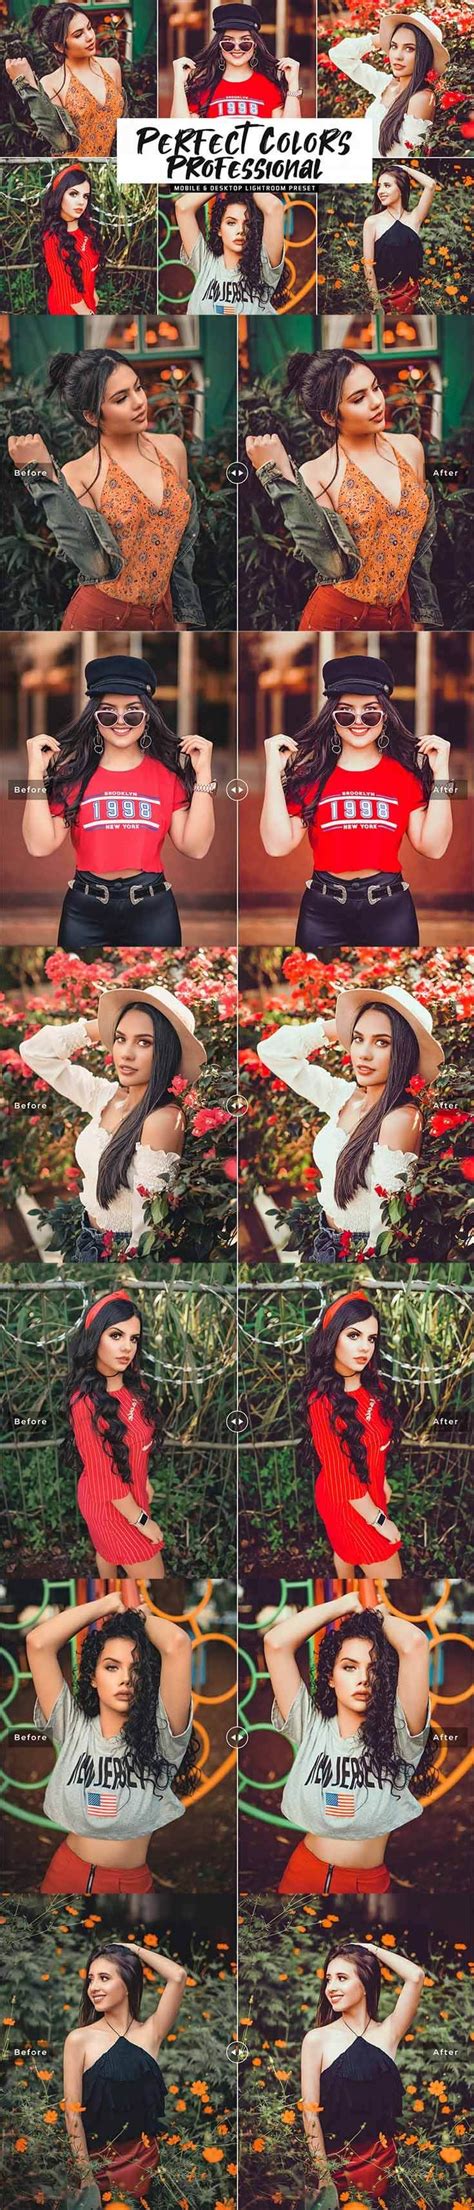 In many instances, you will be able to get a great result with a single click. Free Perfect Colors Professional #Lightroom Preset will ...